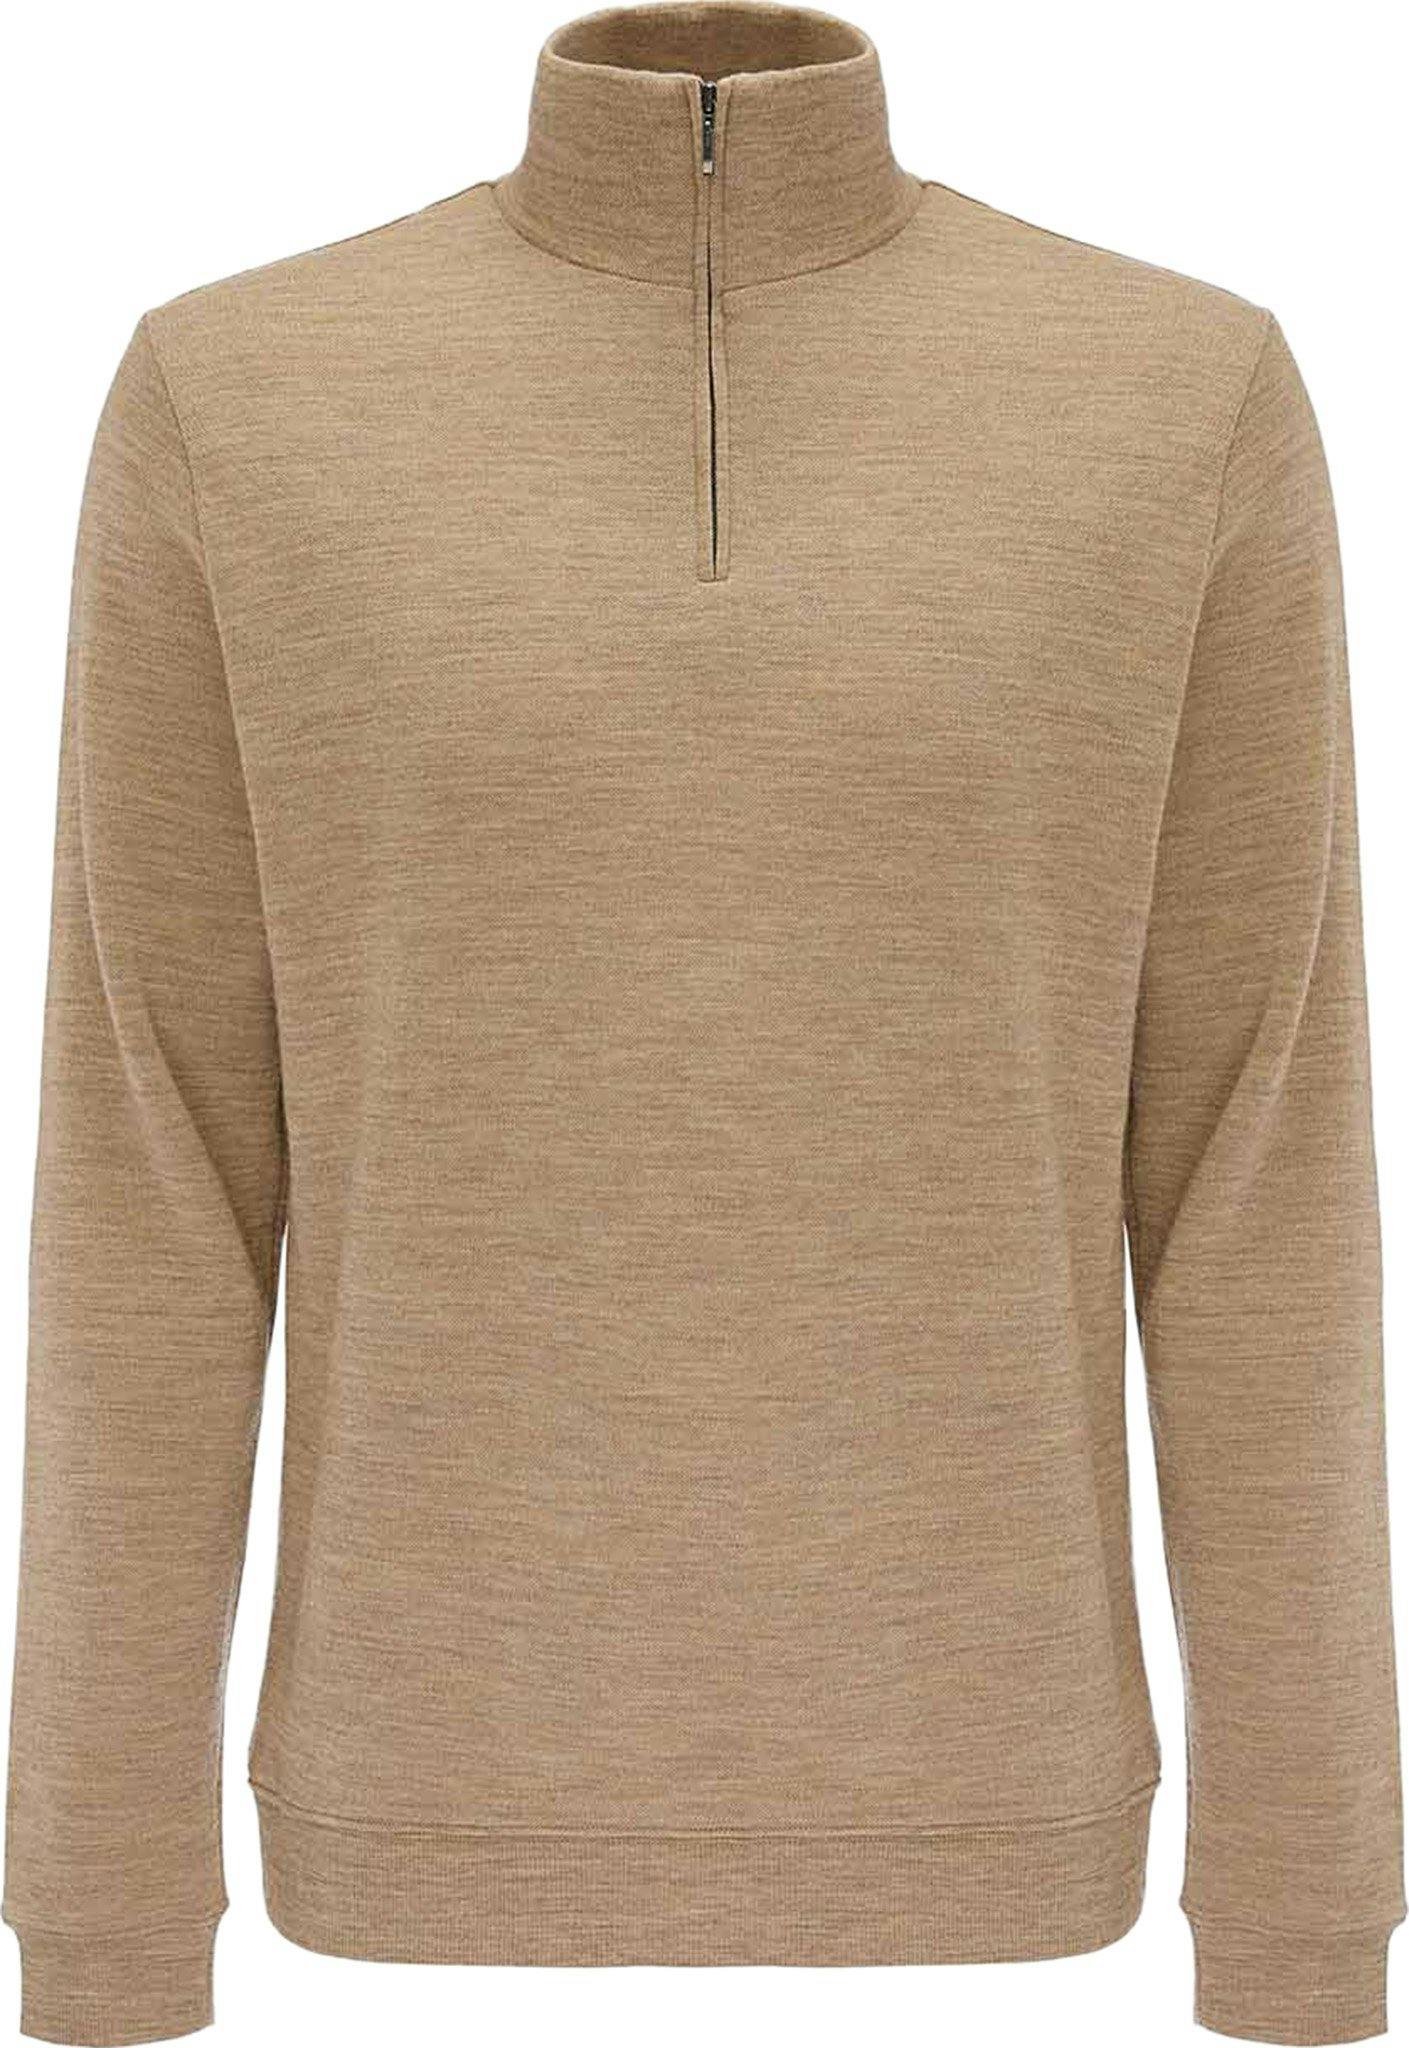 Product image for Tind Zip Up Sweater - Men's